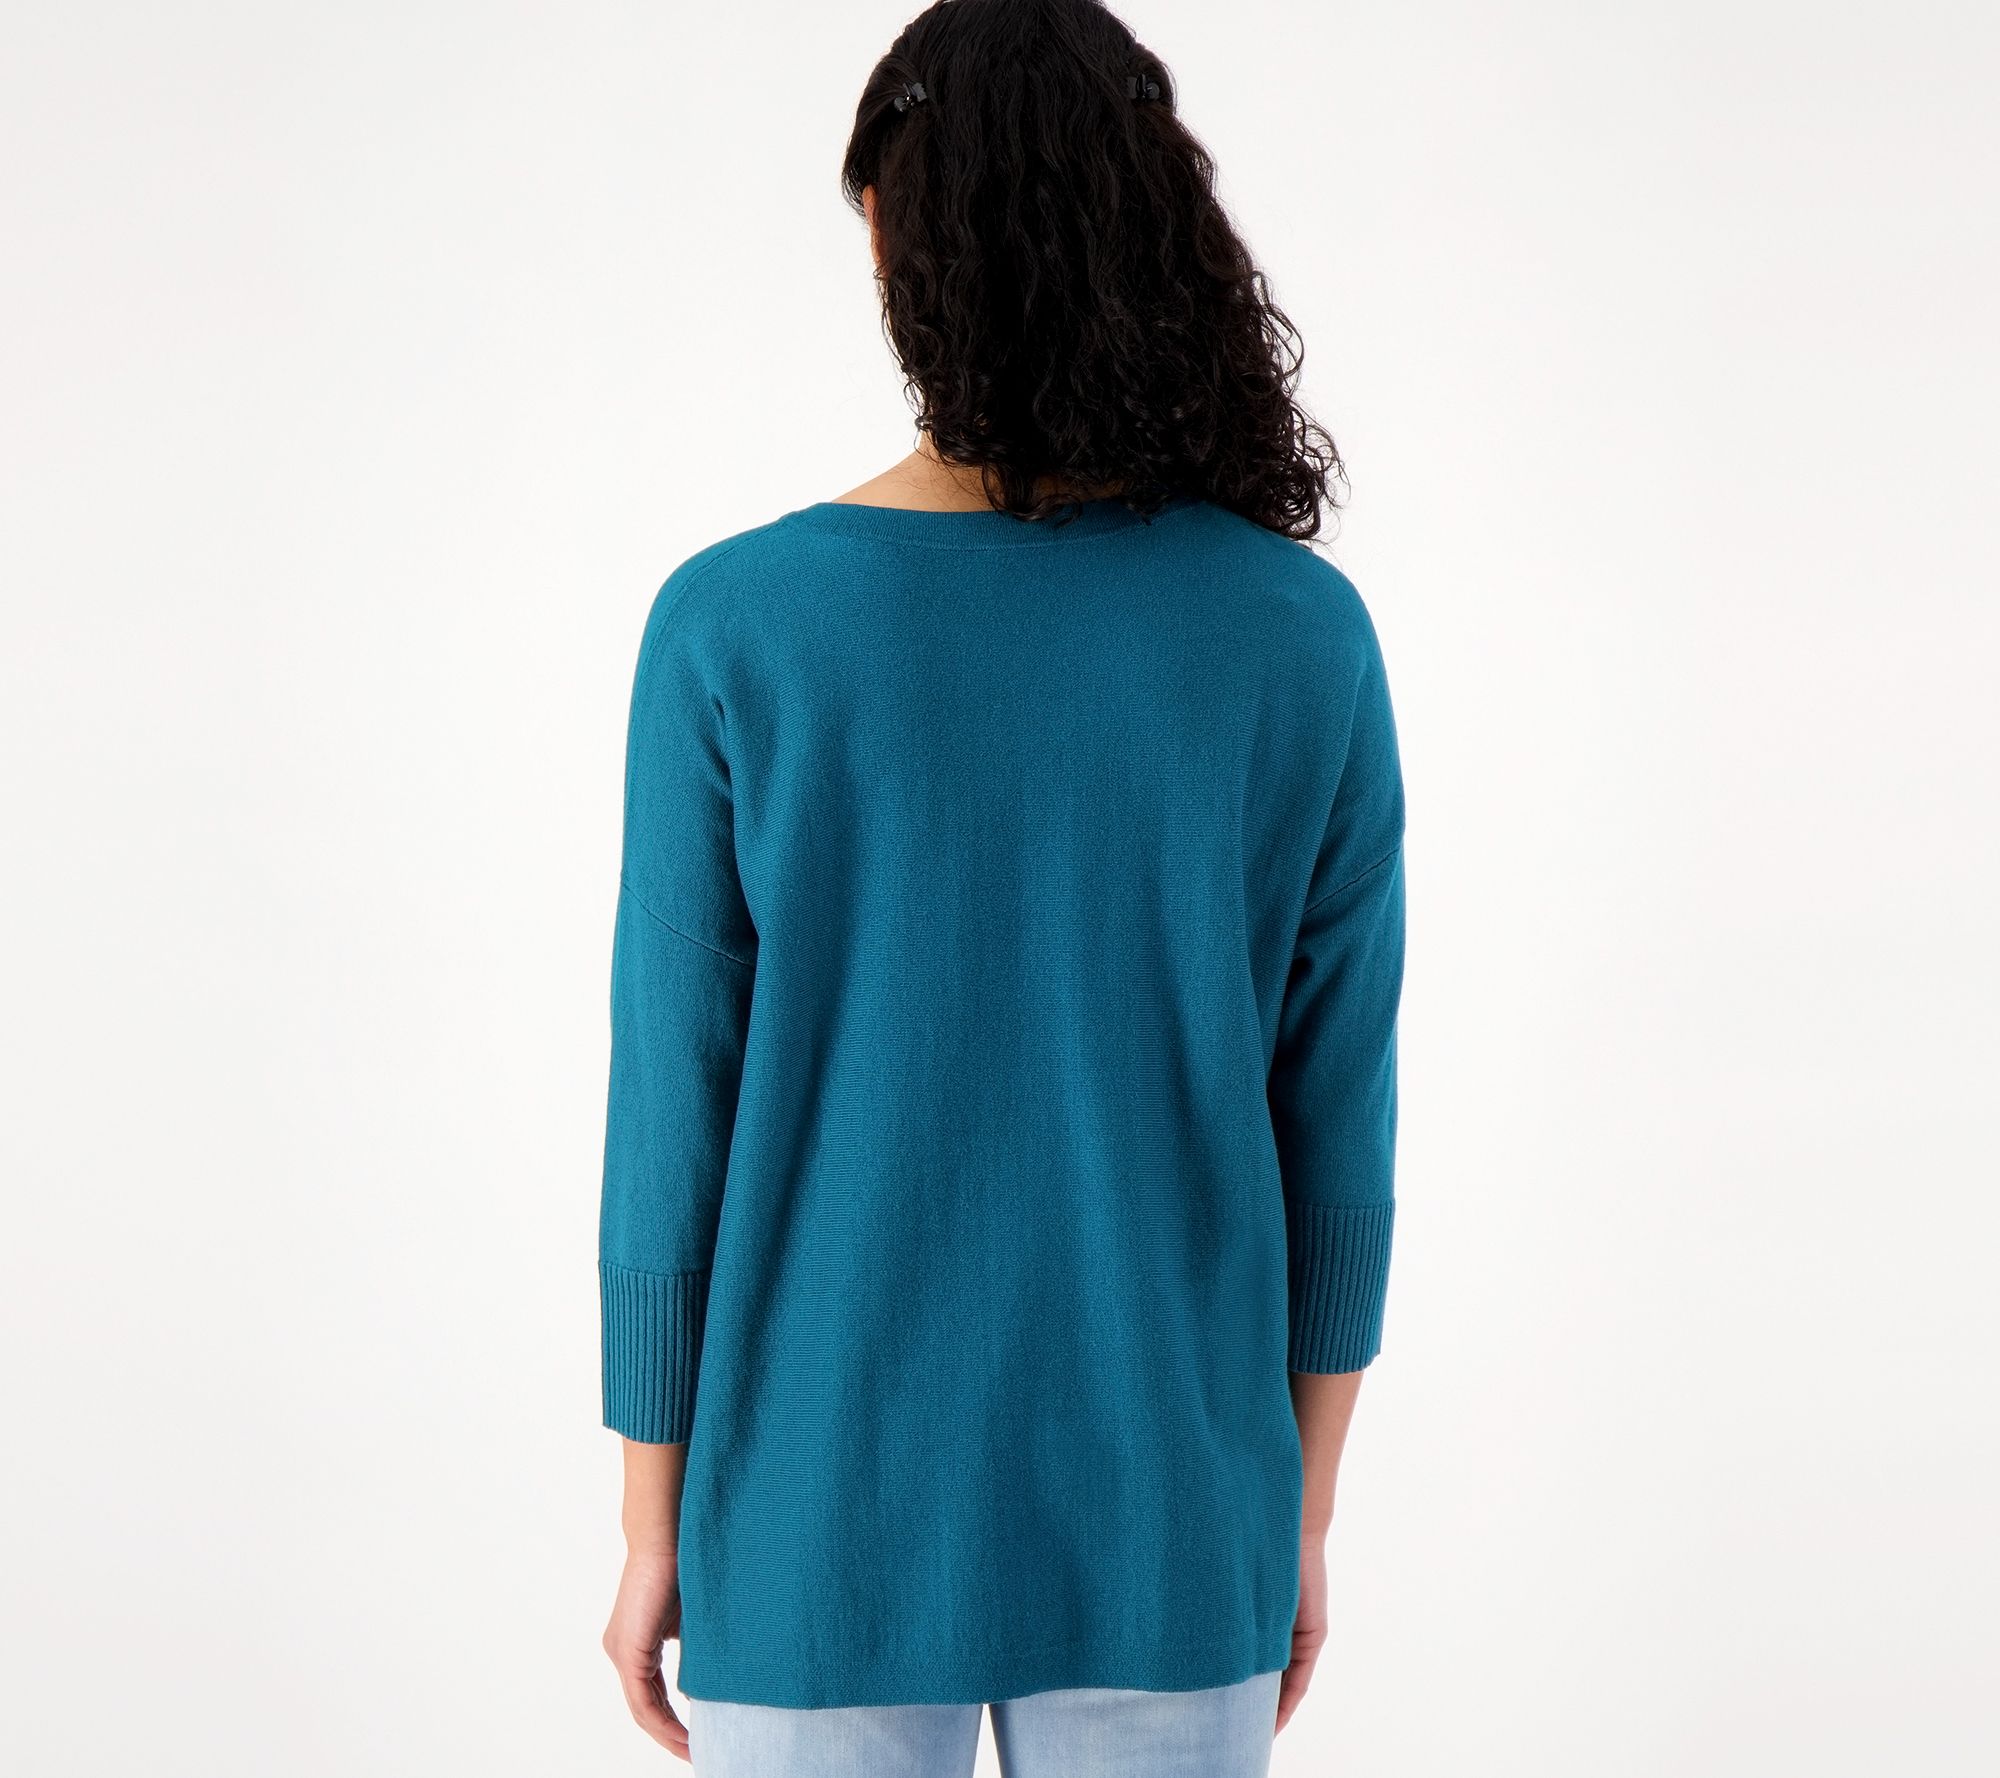 Dolman Tunic Sweater, Red - New Arrivals - The Blue Door Boutique